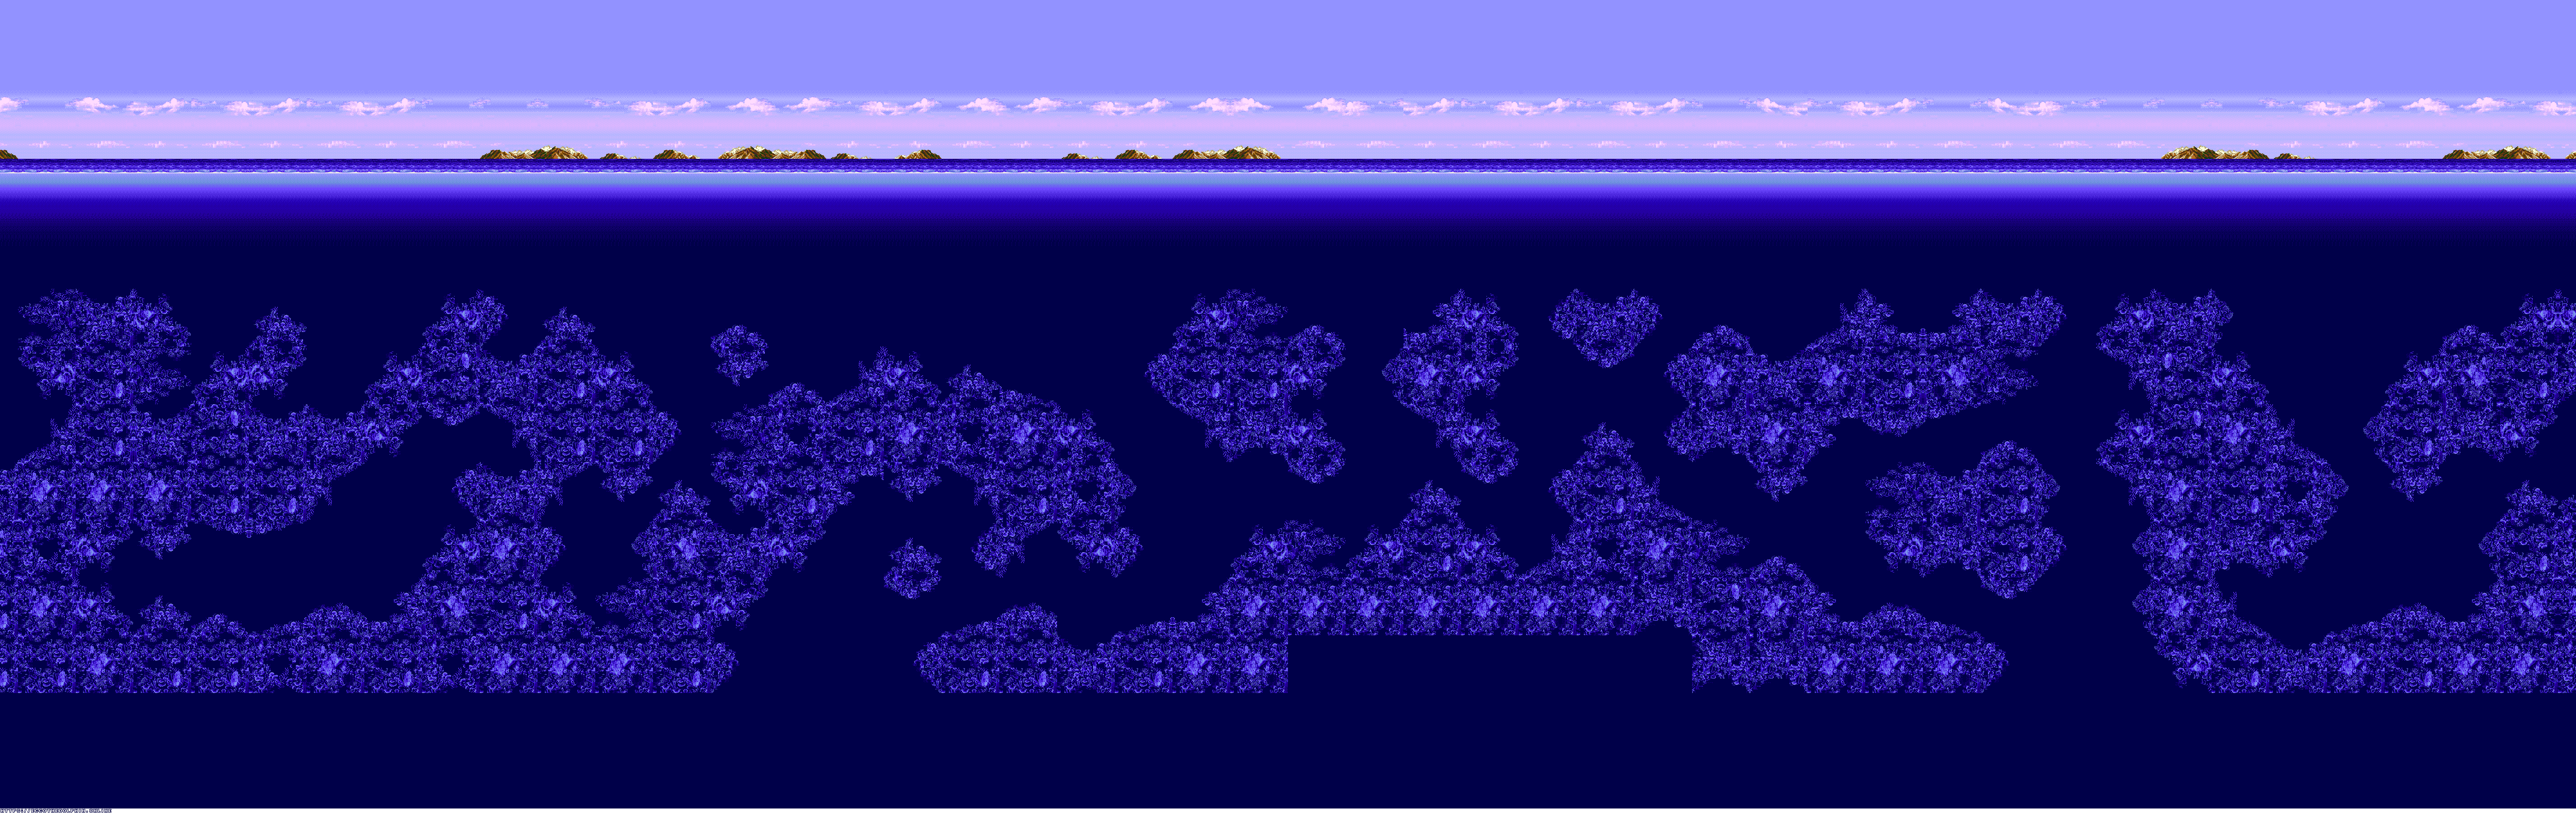 Ecco Jr. - Melodic Waters (Background)